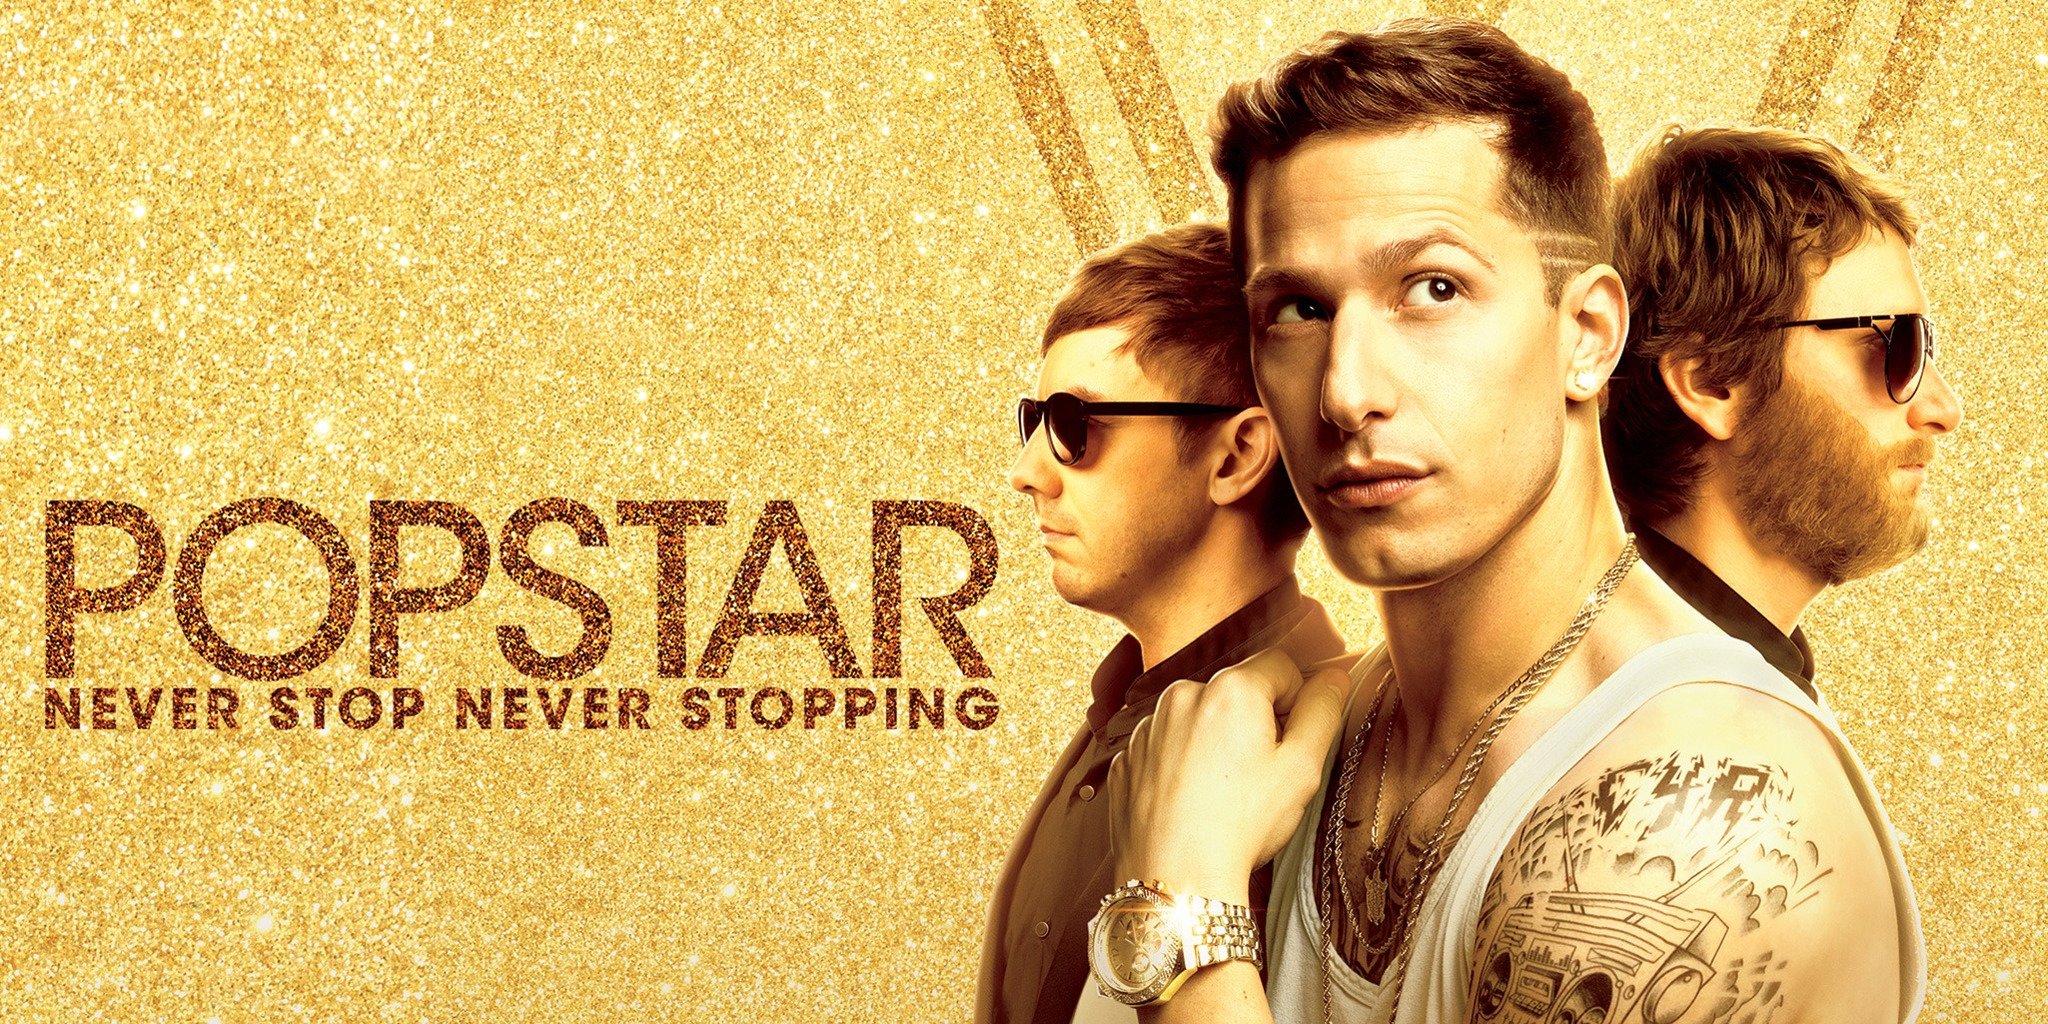 DVD Review: “Popstar: Never Stop Never Stopping” | MVC Delta